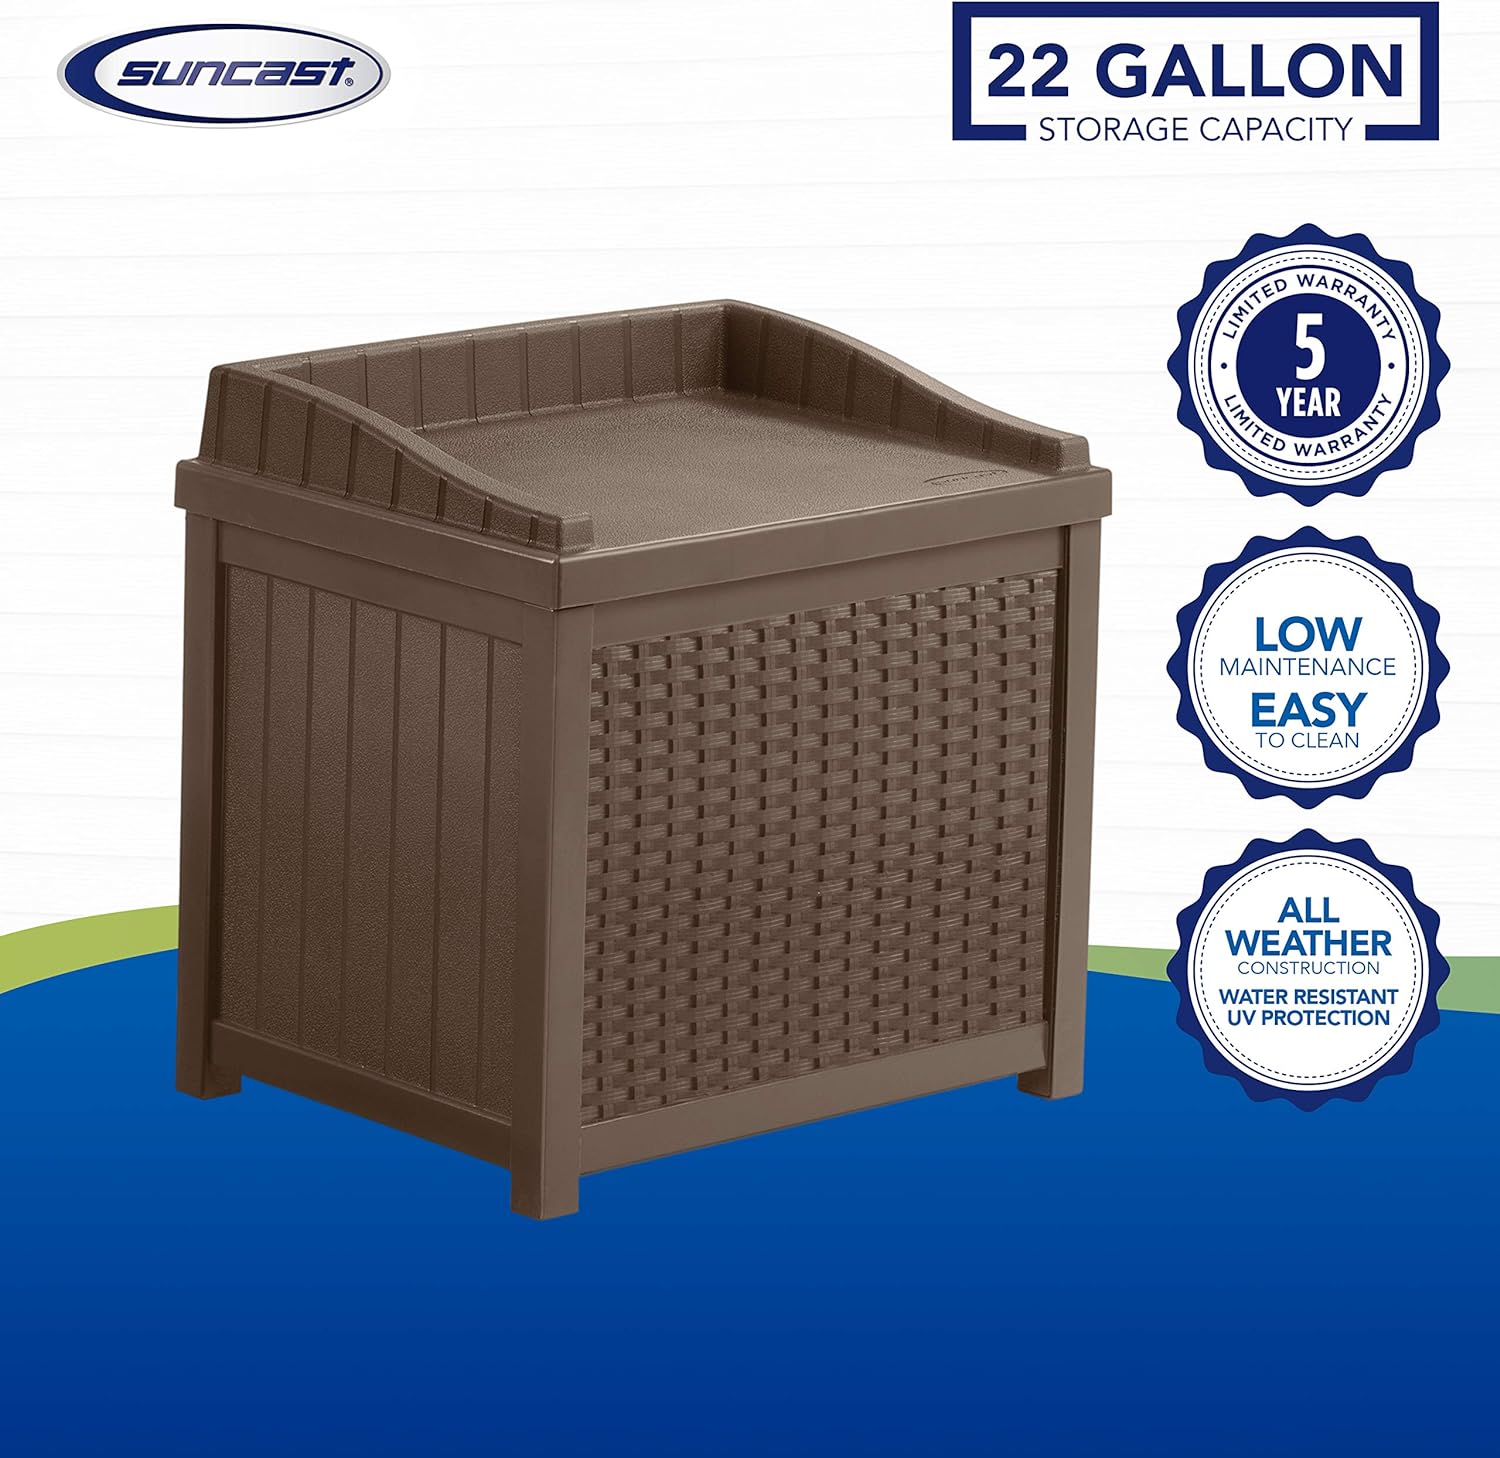 Suncast 22-Gallon Small Deck Box - Lightweight Resin Indoor/Outdoor Storage Container and Seat for Patio Cushions, Gardening Tools and